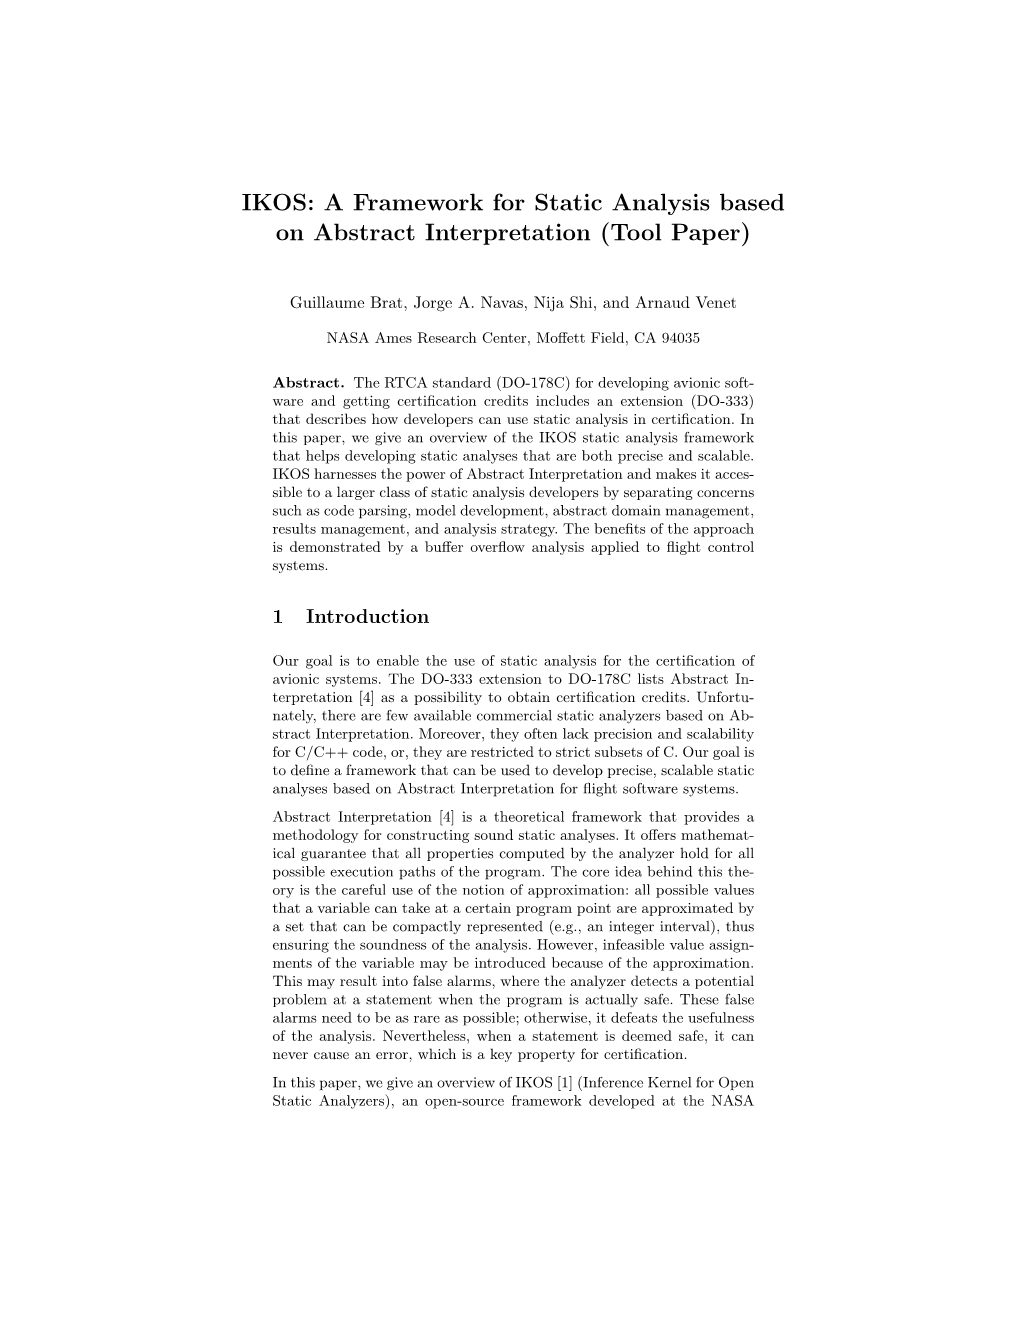 IKOS: a Framework for Static Analysis Based on Abstract Interpretation (Tool Paper)